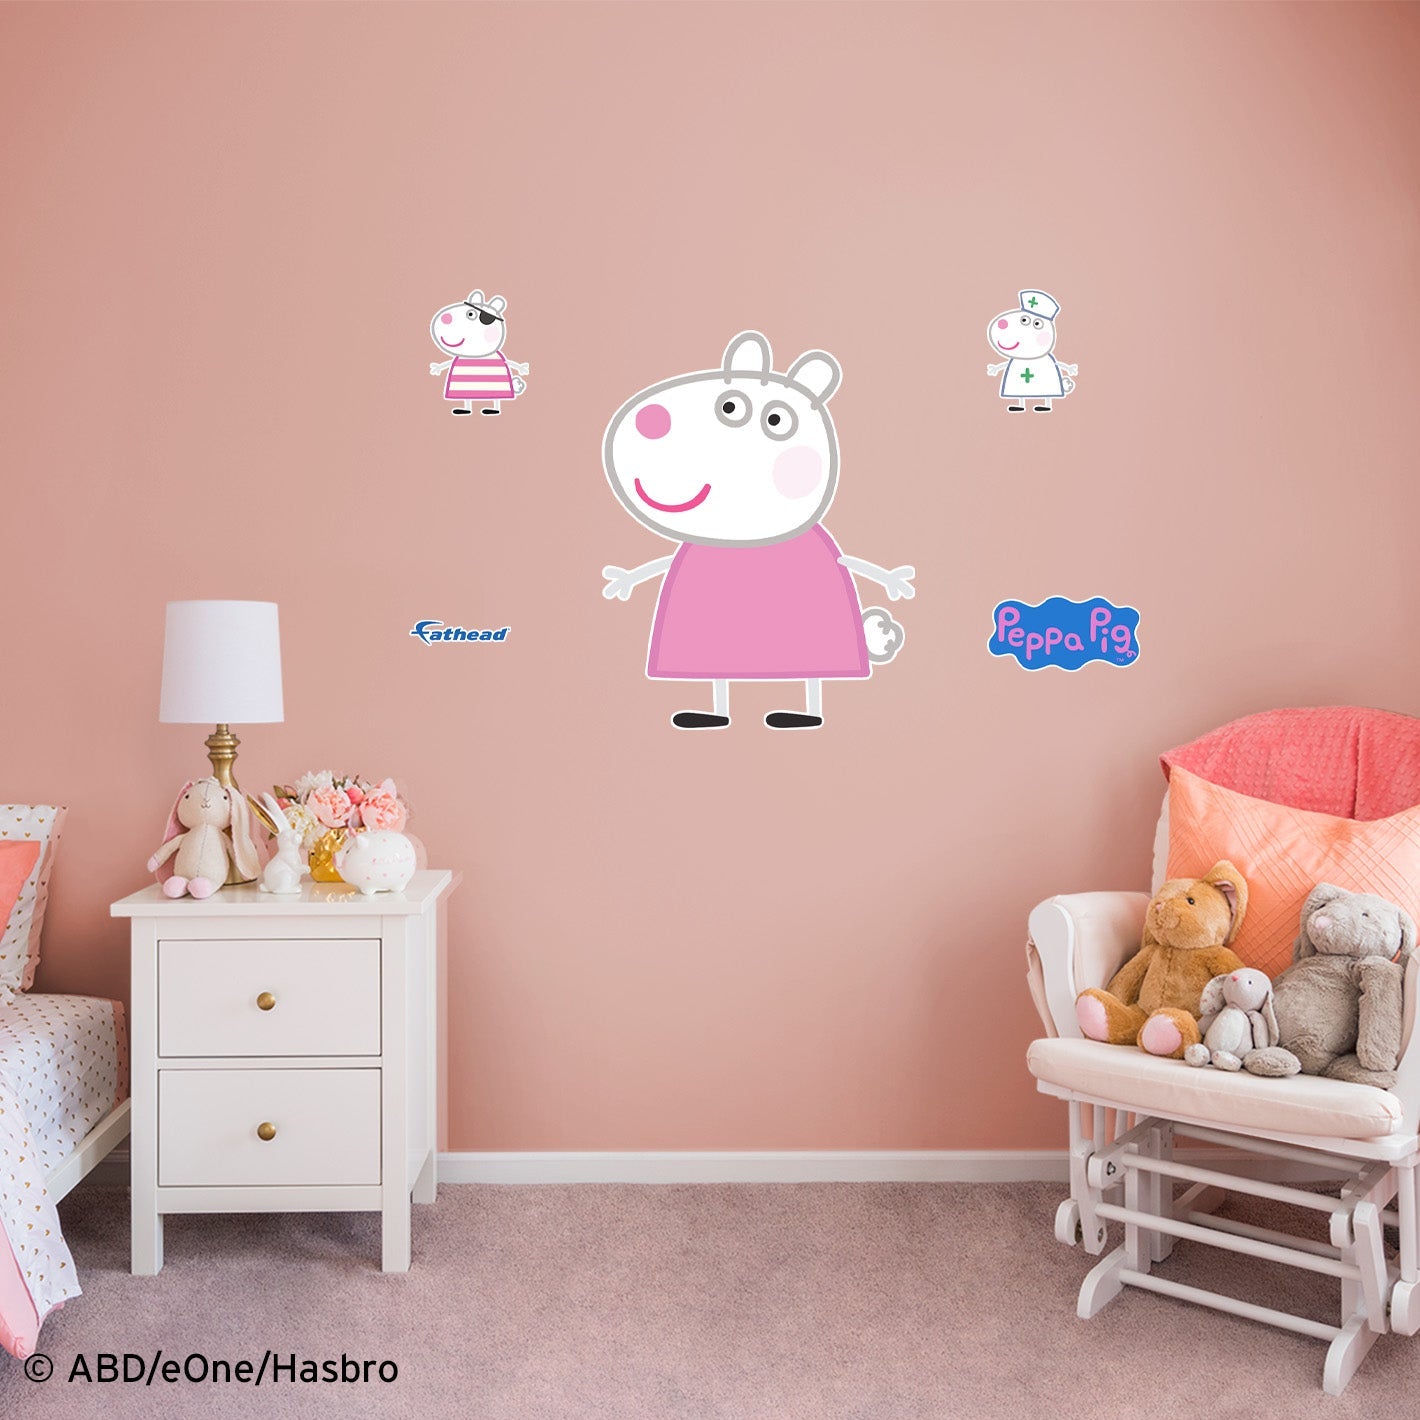 Peppa Pig: Suzy RealBigs - Officially Licensed Hasbro Removable Adhesive Decal